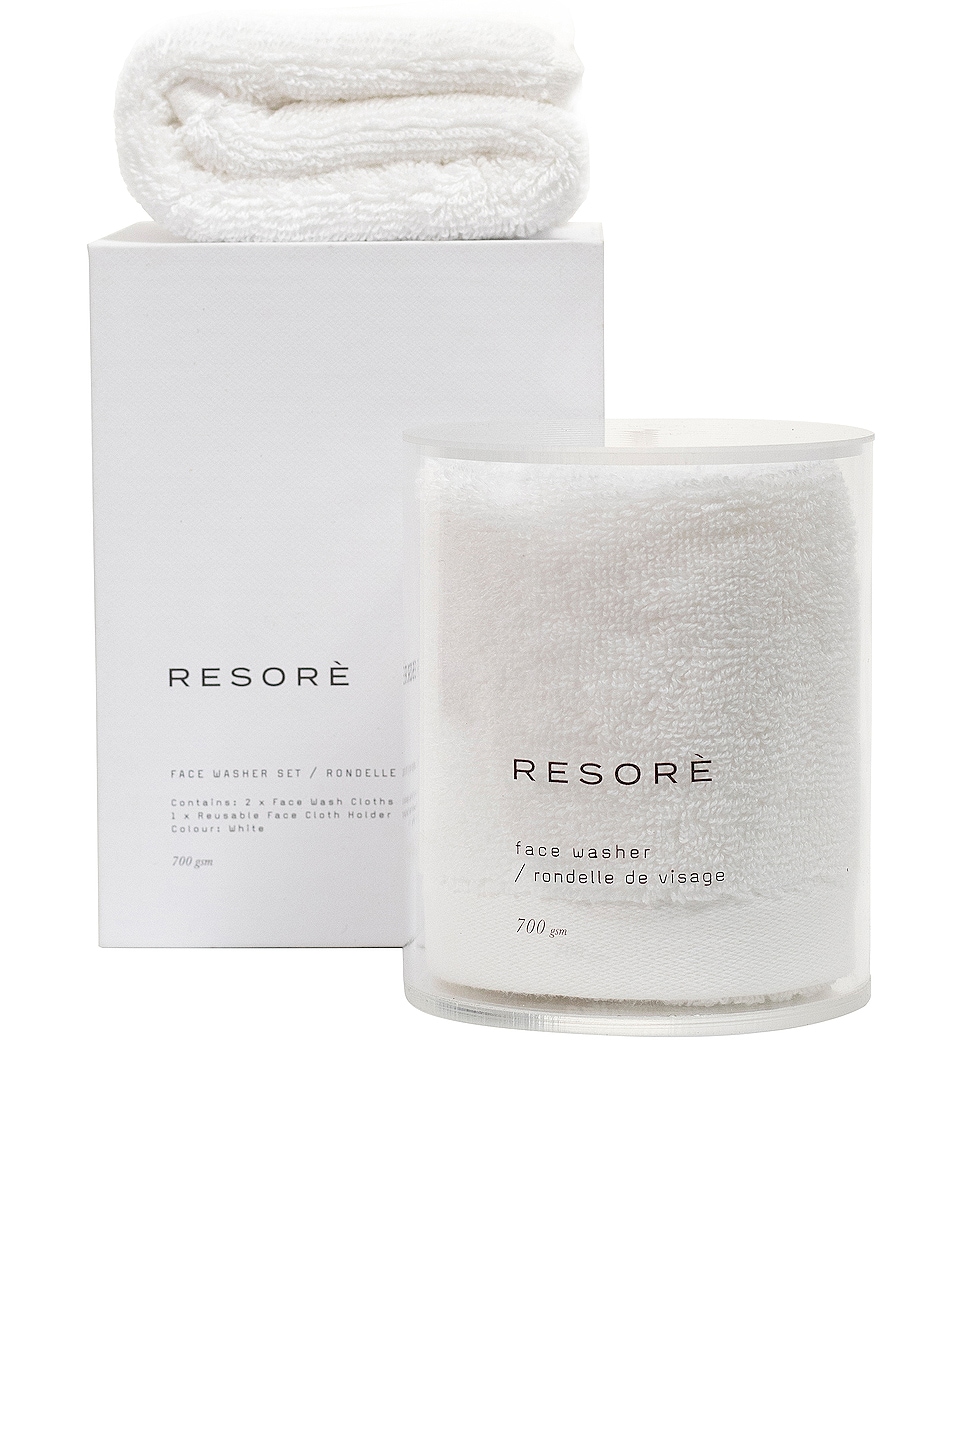 Resore Set of 2 Wash Cloths With Wash Cloth Holder Toasted Almond